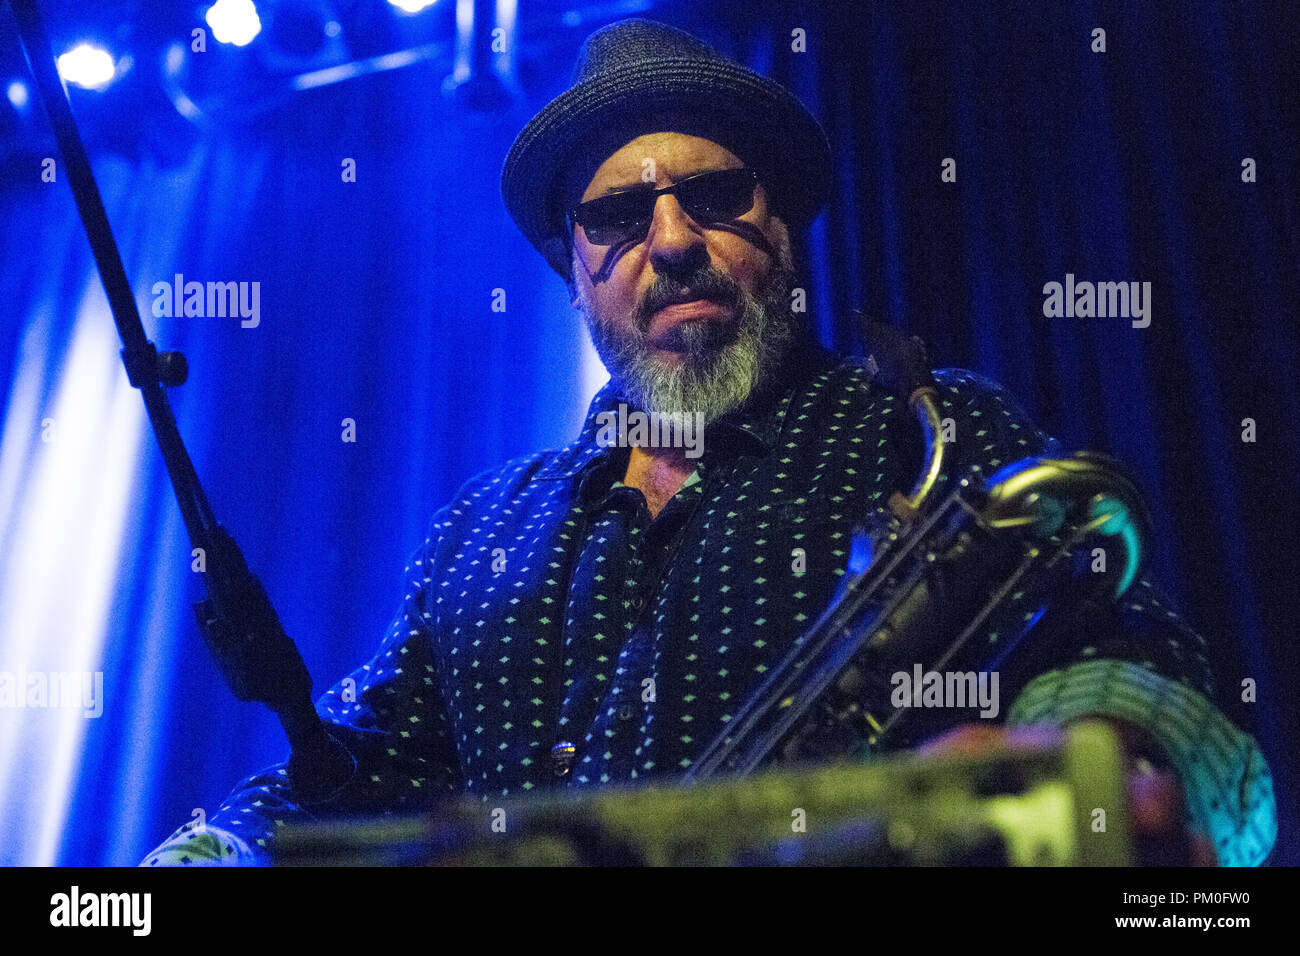 Norway, Oslo - August 30, 2018. The American rock band Los Lobos performs a live concert at Cosmopolite in Oslo. Here musician Steve Berlin is seen live on stage. (Photo credit: Gonzales Photo - Per-Otto Oppi). Stock Photo